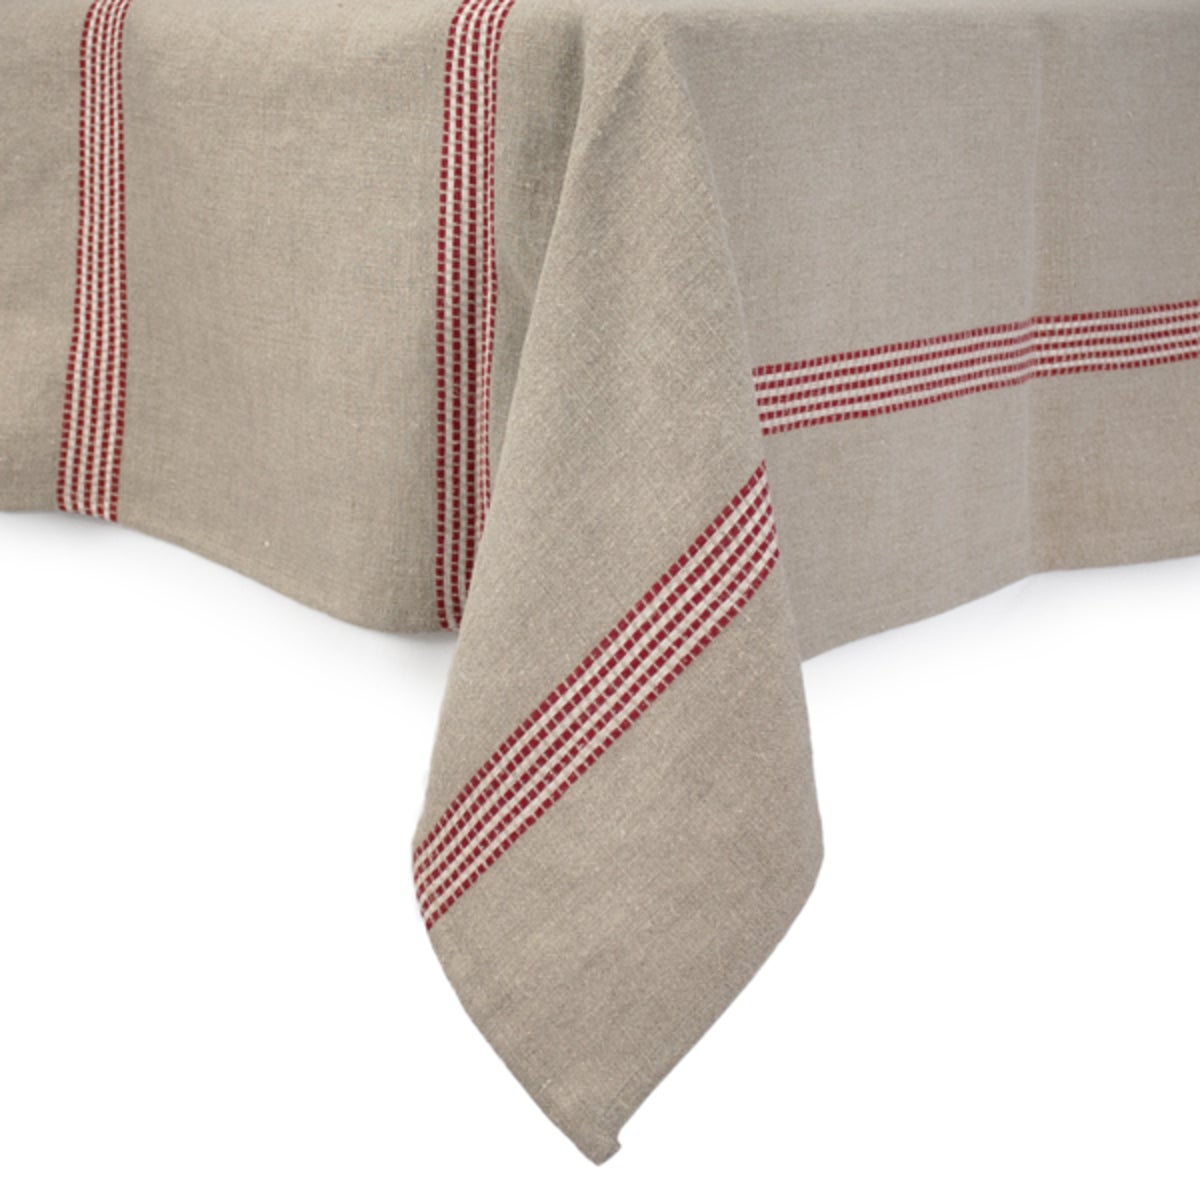 Saint Malo Linen Tablecloth 61" x 90" - Red